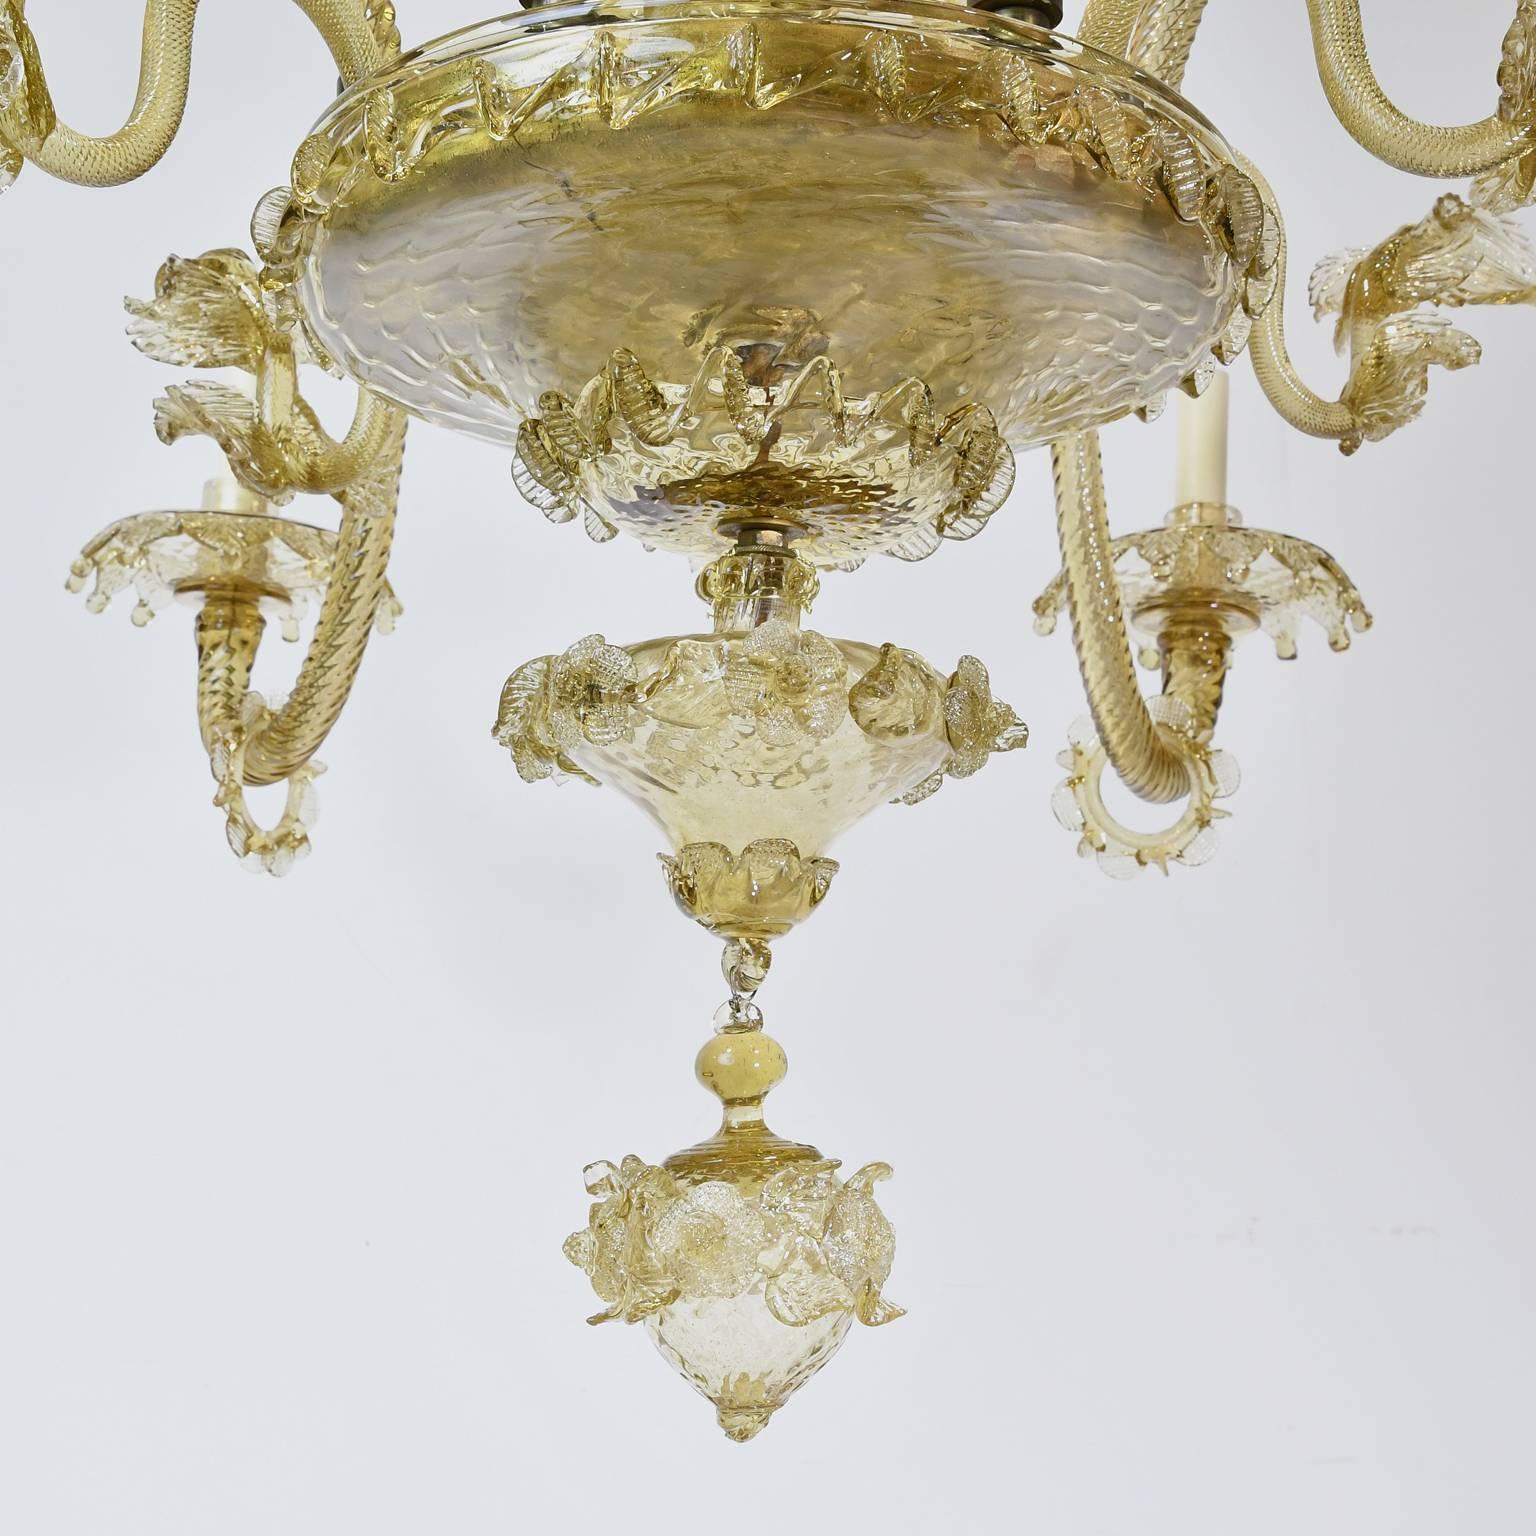 Italian Large 20th Century Venetian Murano Glass Chandelier with Six Arms